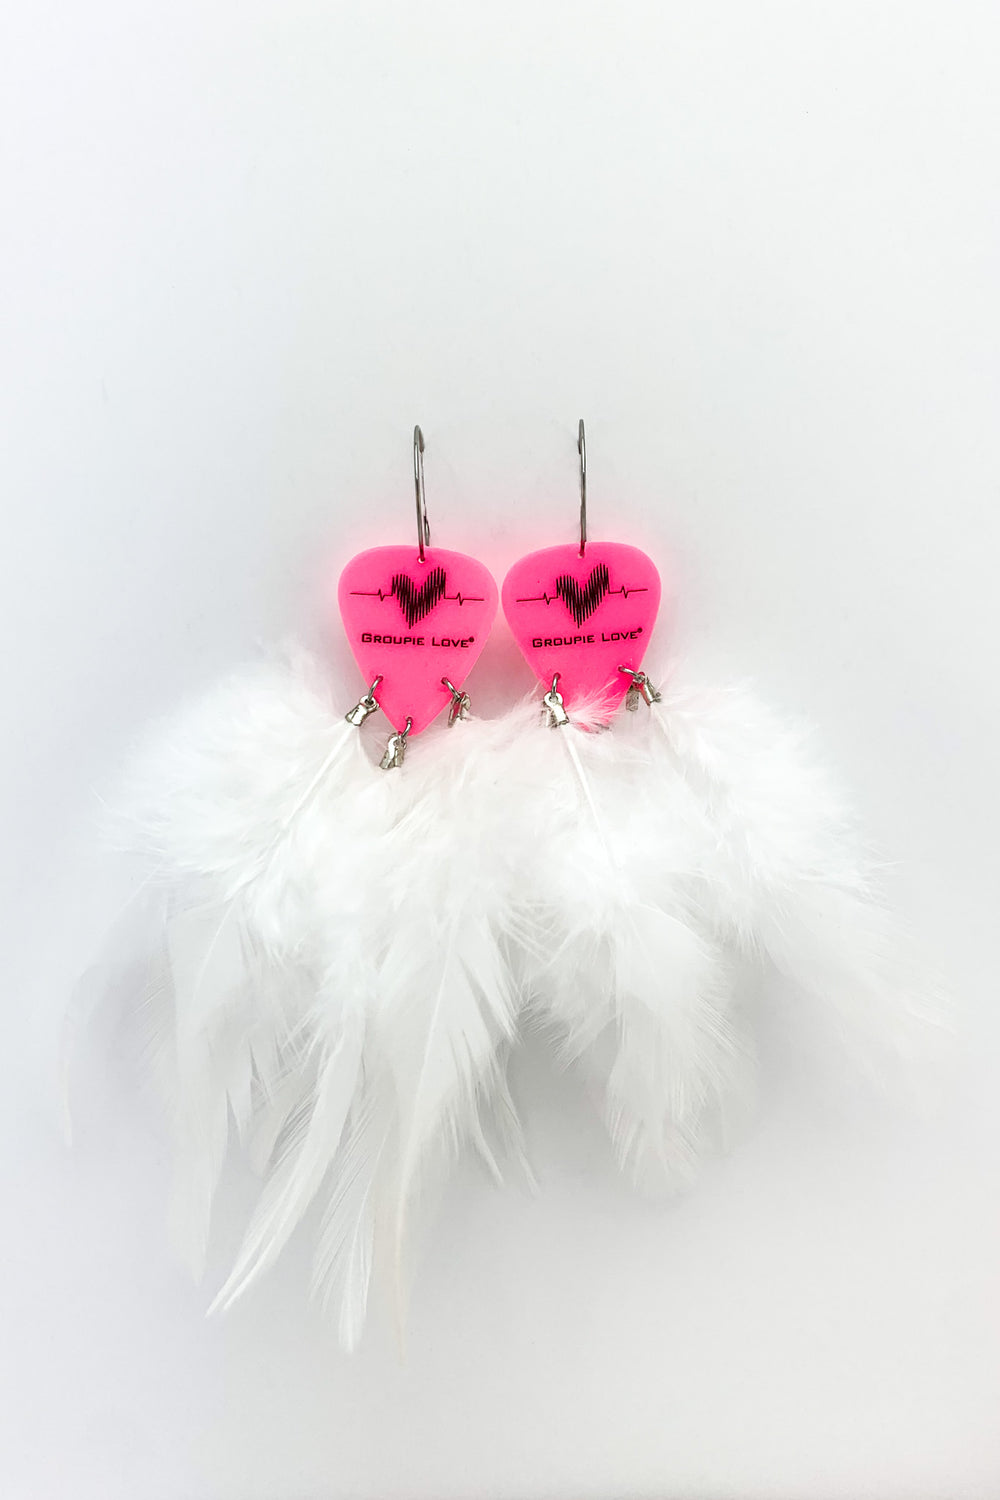 Groupie Love Pink White Feather Guitar Pick Earrings